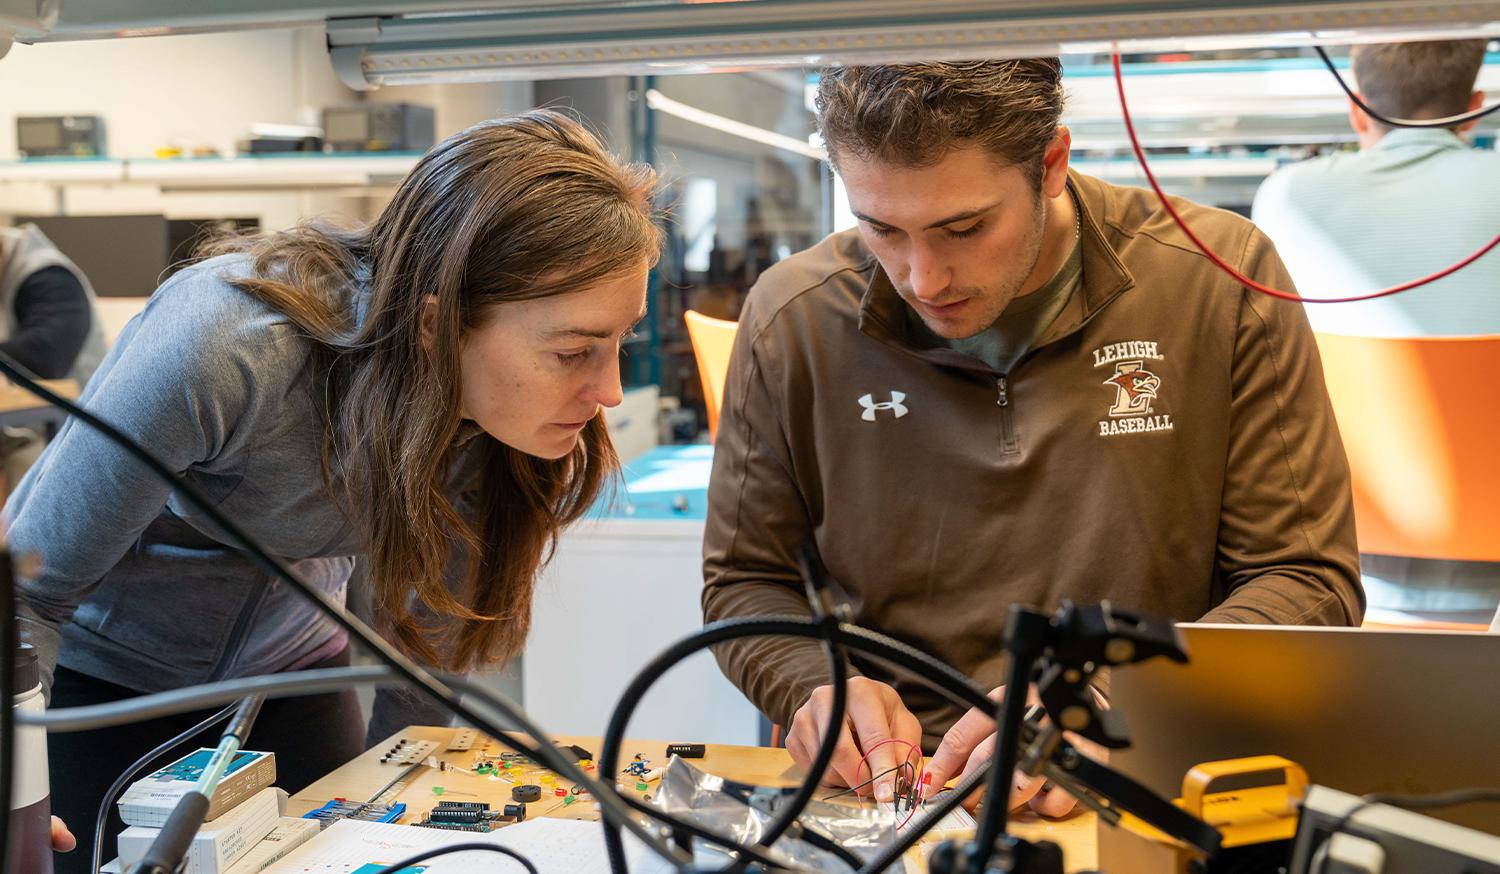 A female professor and male student working on electronics